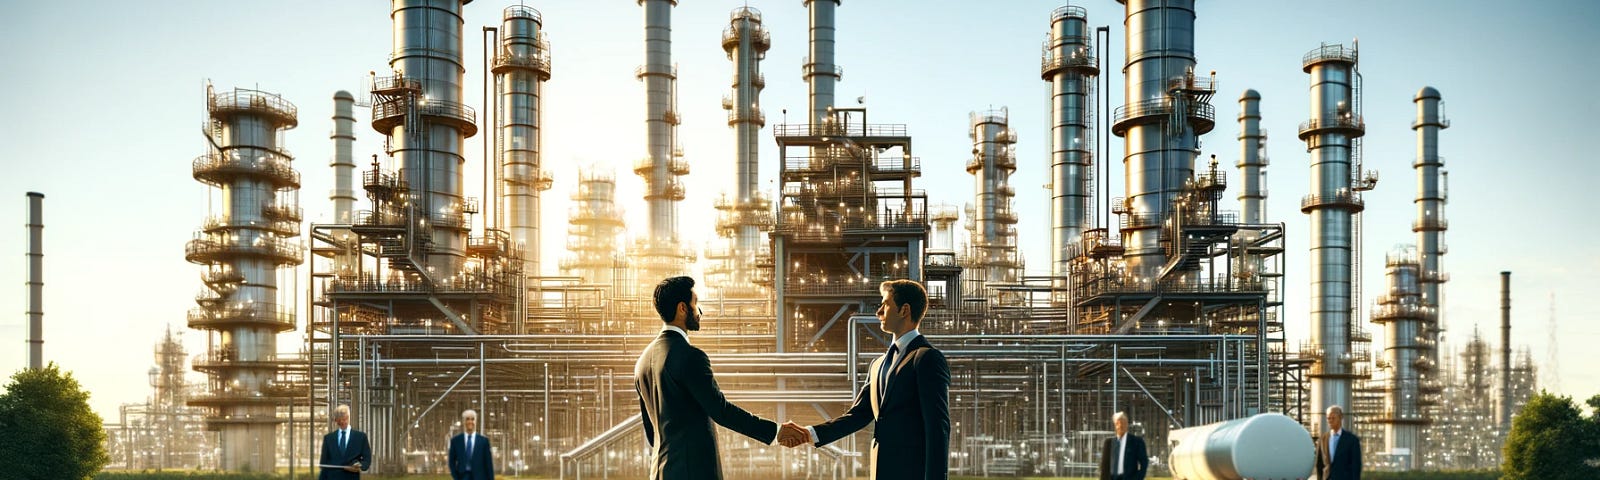 ChatGPT & DALL-E generated panoramic image showing a governmental executive and an oil executive meeting in front of an oil refinery, with a formal exchange taking place in an industrial setting.